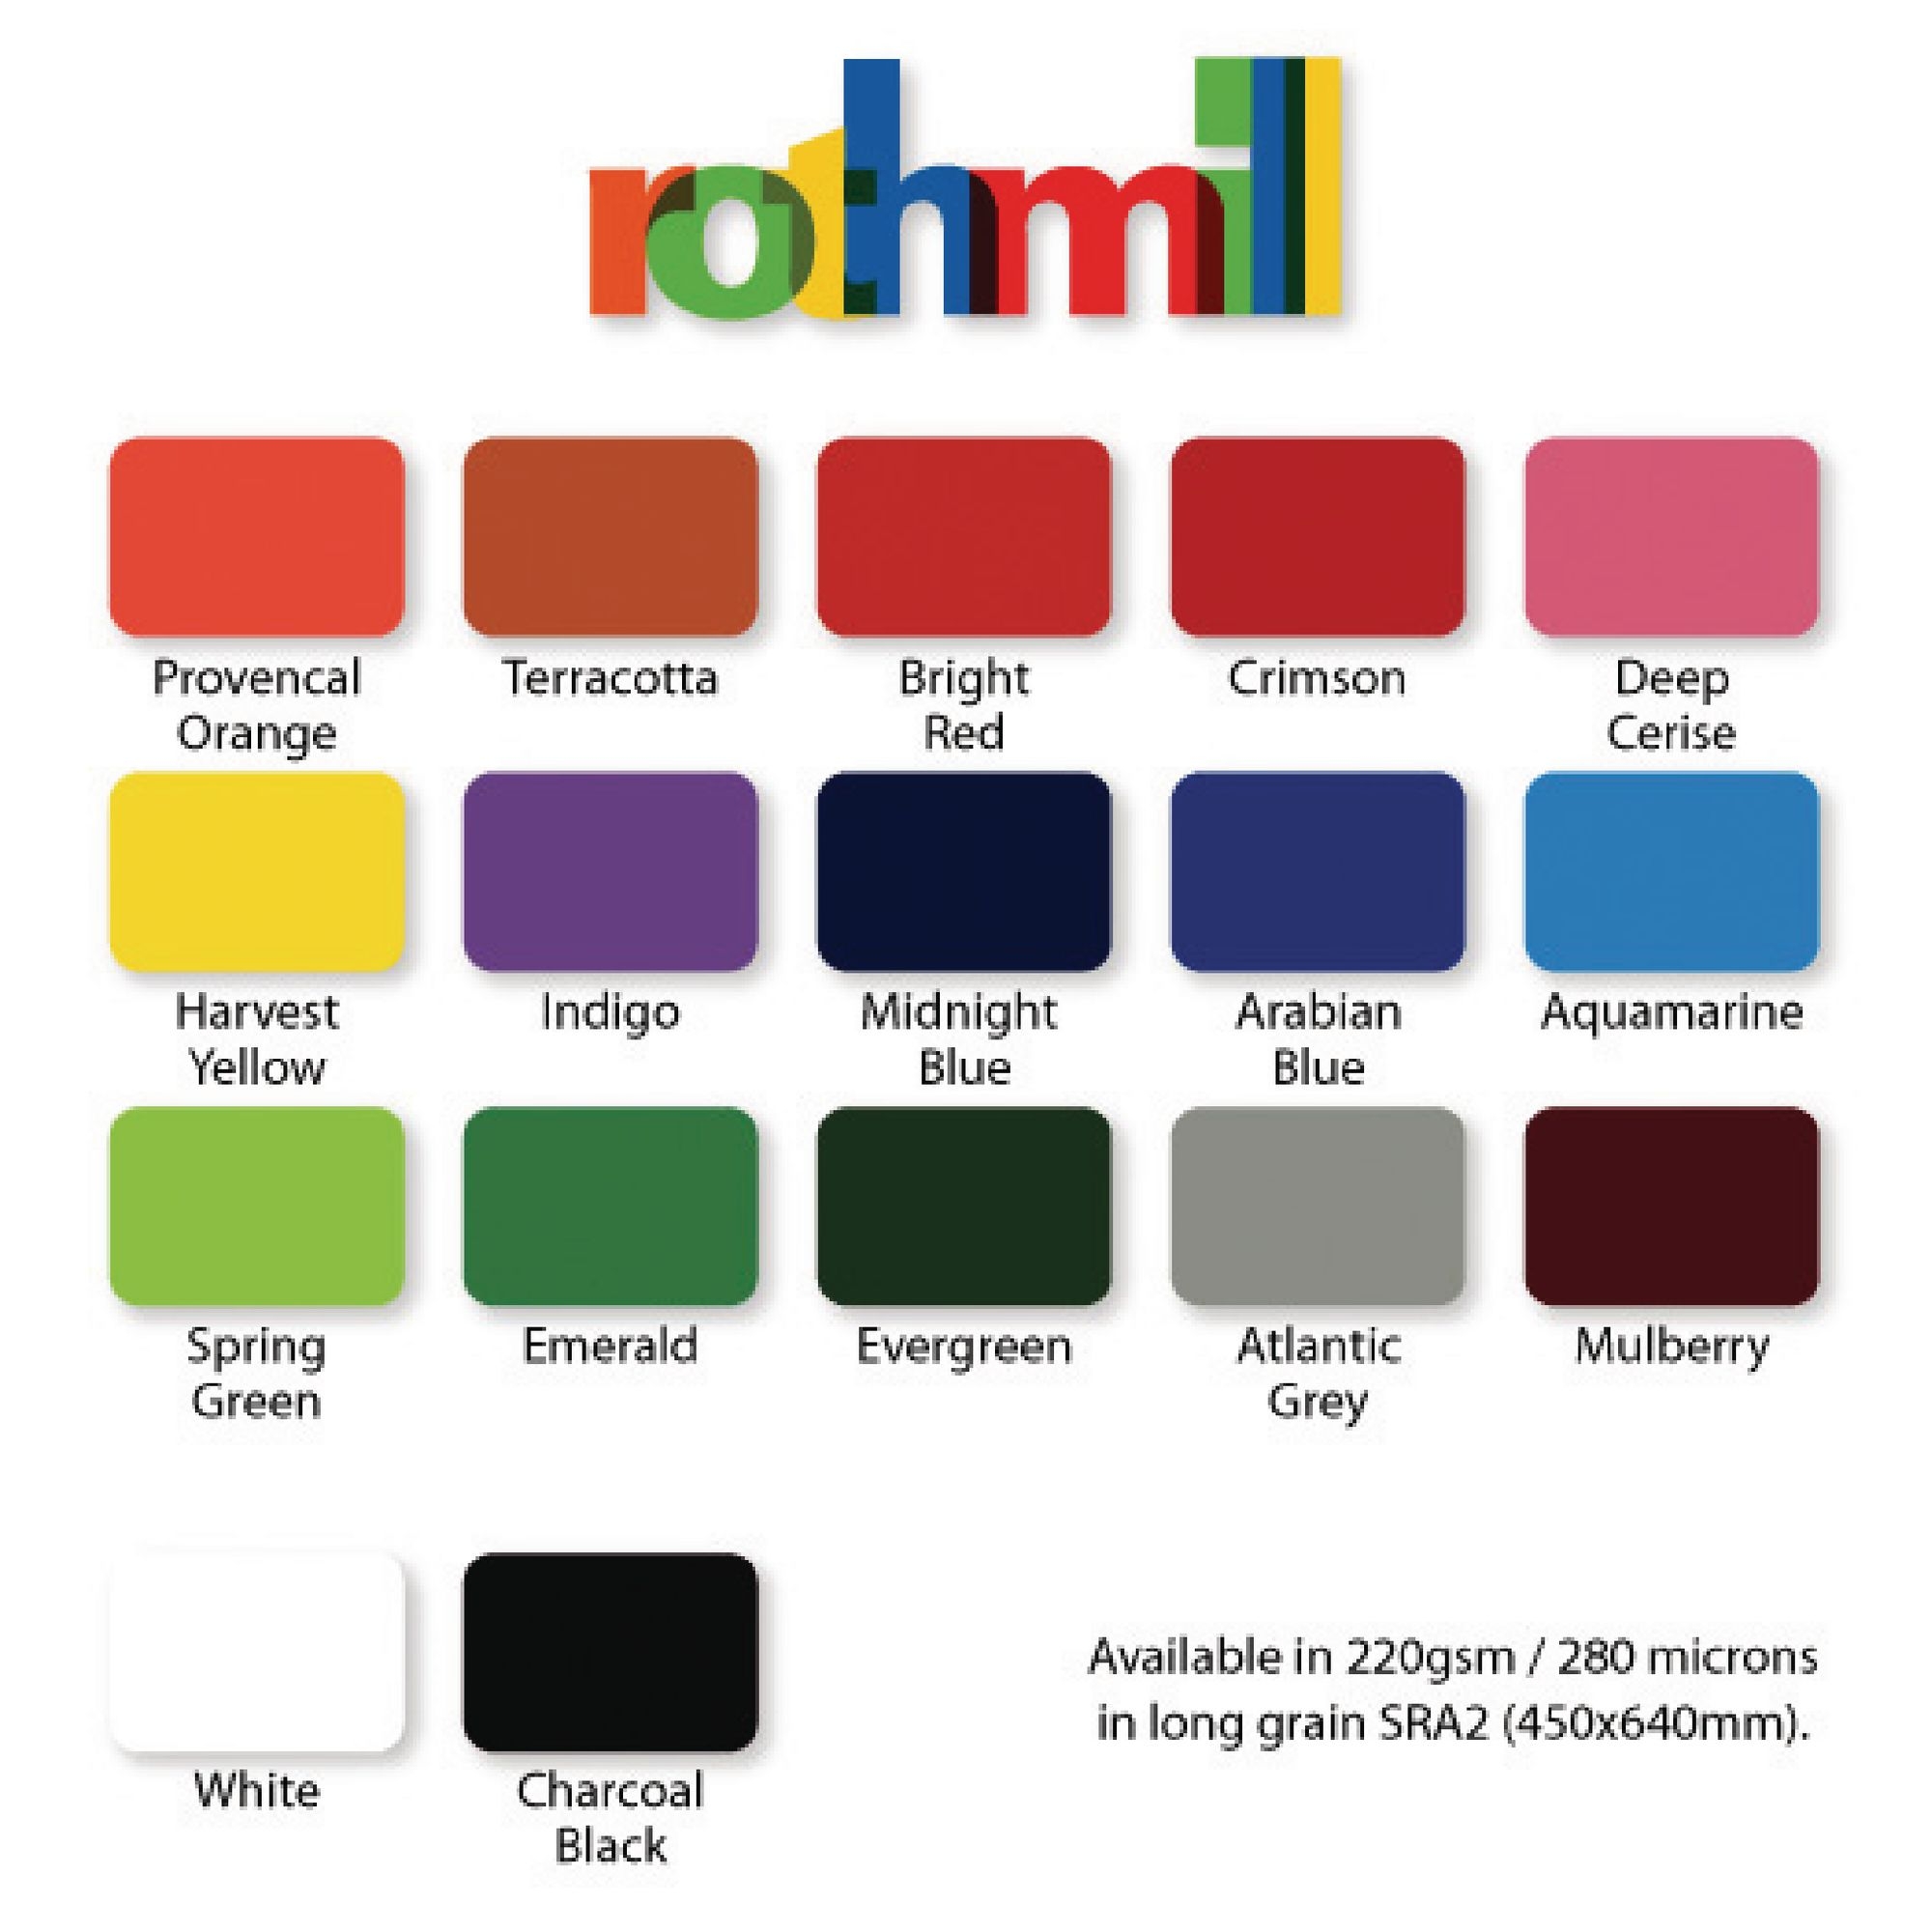 Rothmill A4 Brilliant Colour Card - Spring green